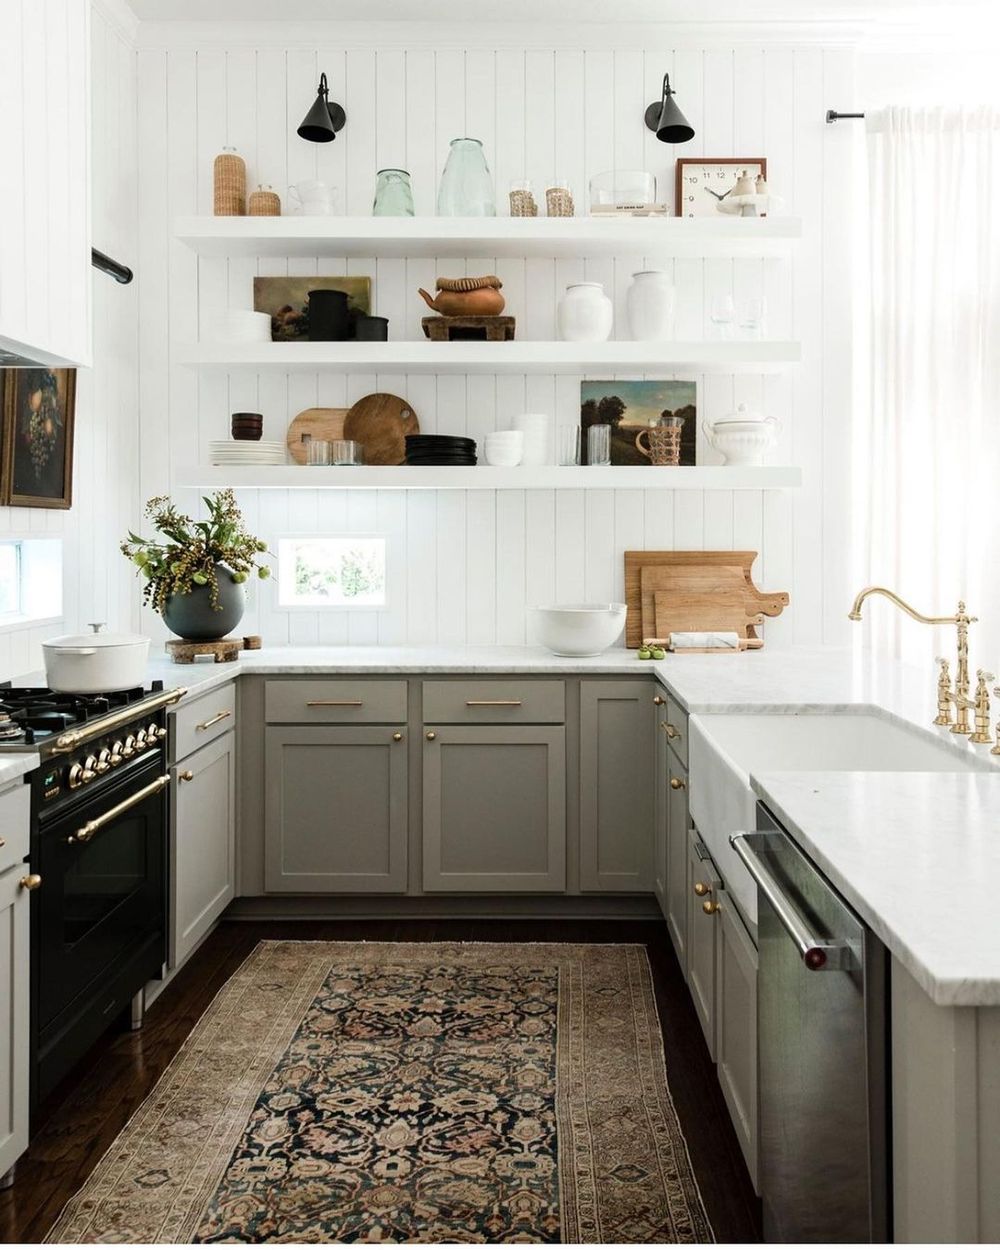 https://curatedinterior.com/wp-content/uploads/2021/01/Neutral-Kitchen-with-Faded-Sage-Green-Cabinets-via-@theidentitecollective.jpg